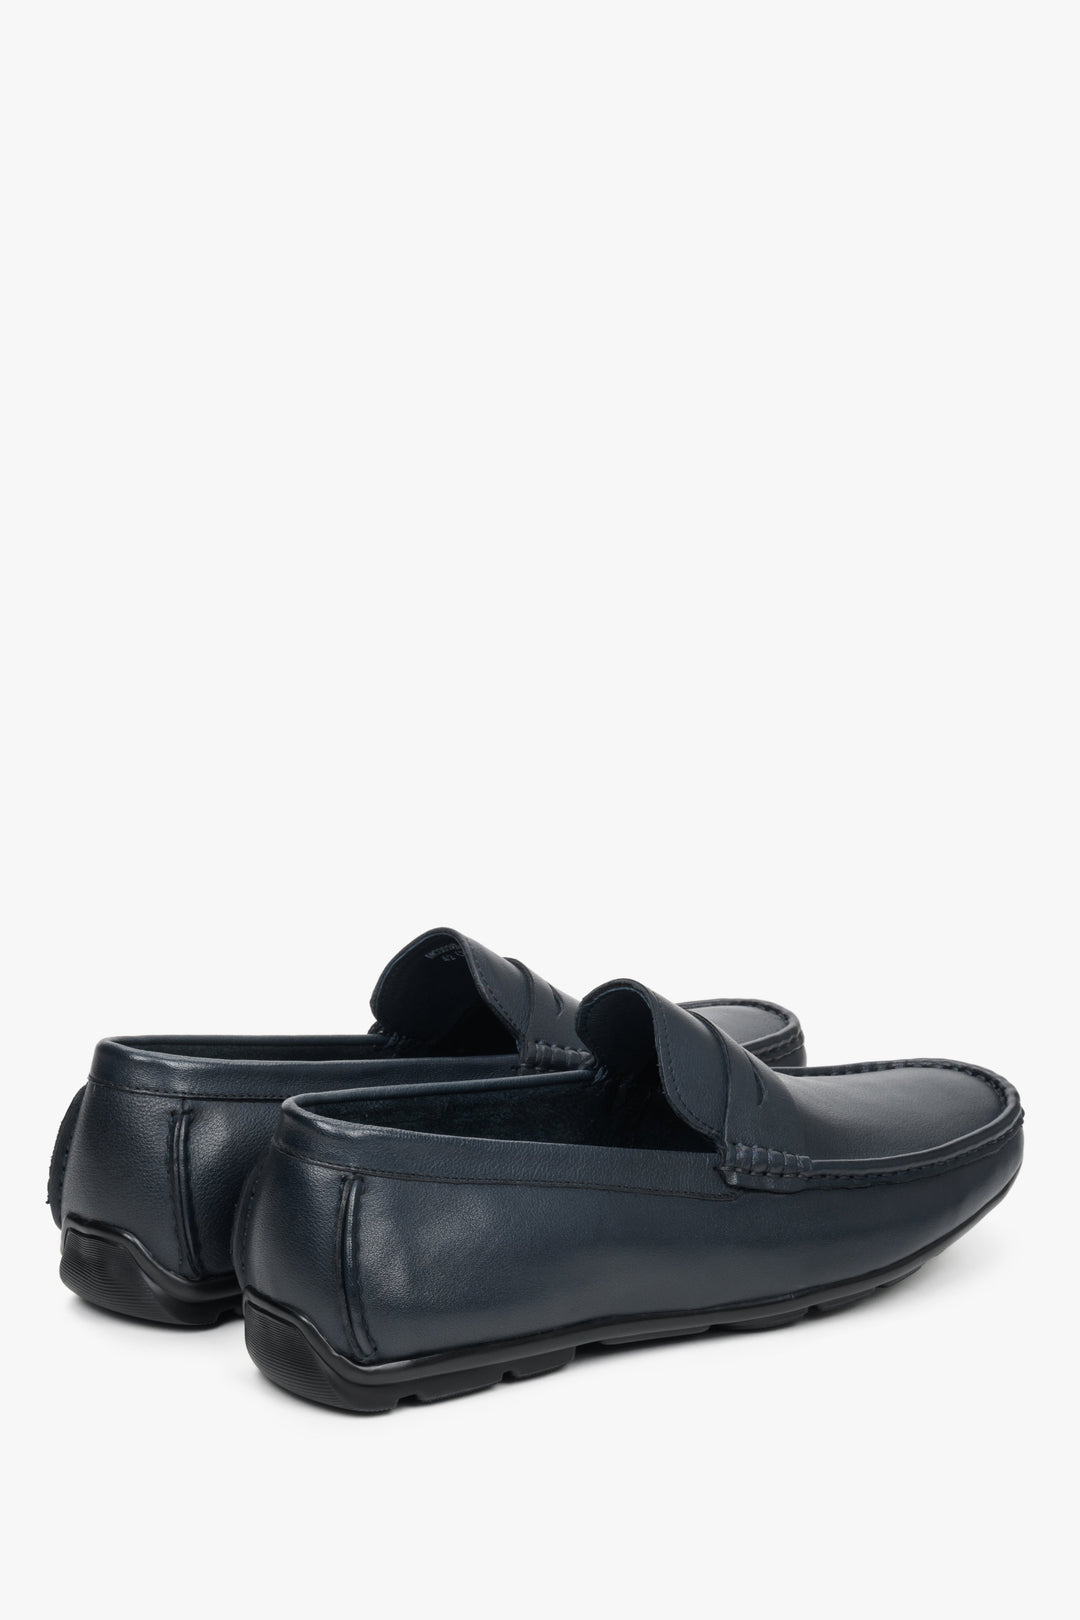 Estro men's leather loafers in navy blue for spring and autumn - close-up on the heel and side seam of the shoes.